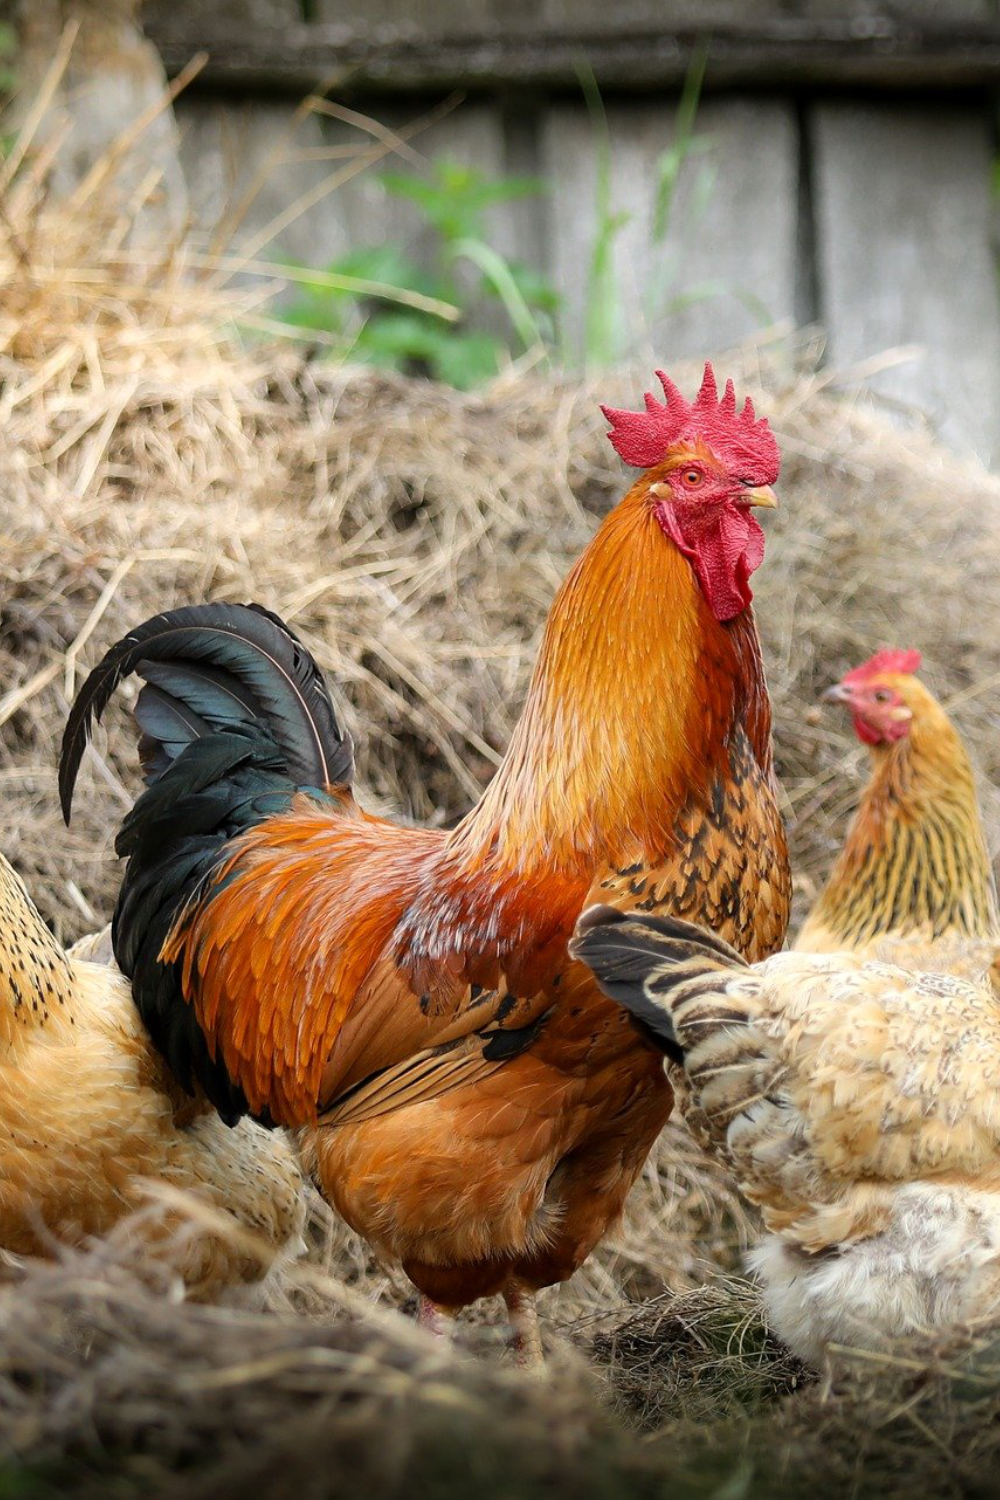 Chickens, Gardens and Bees, Oh My!